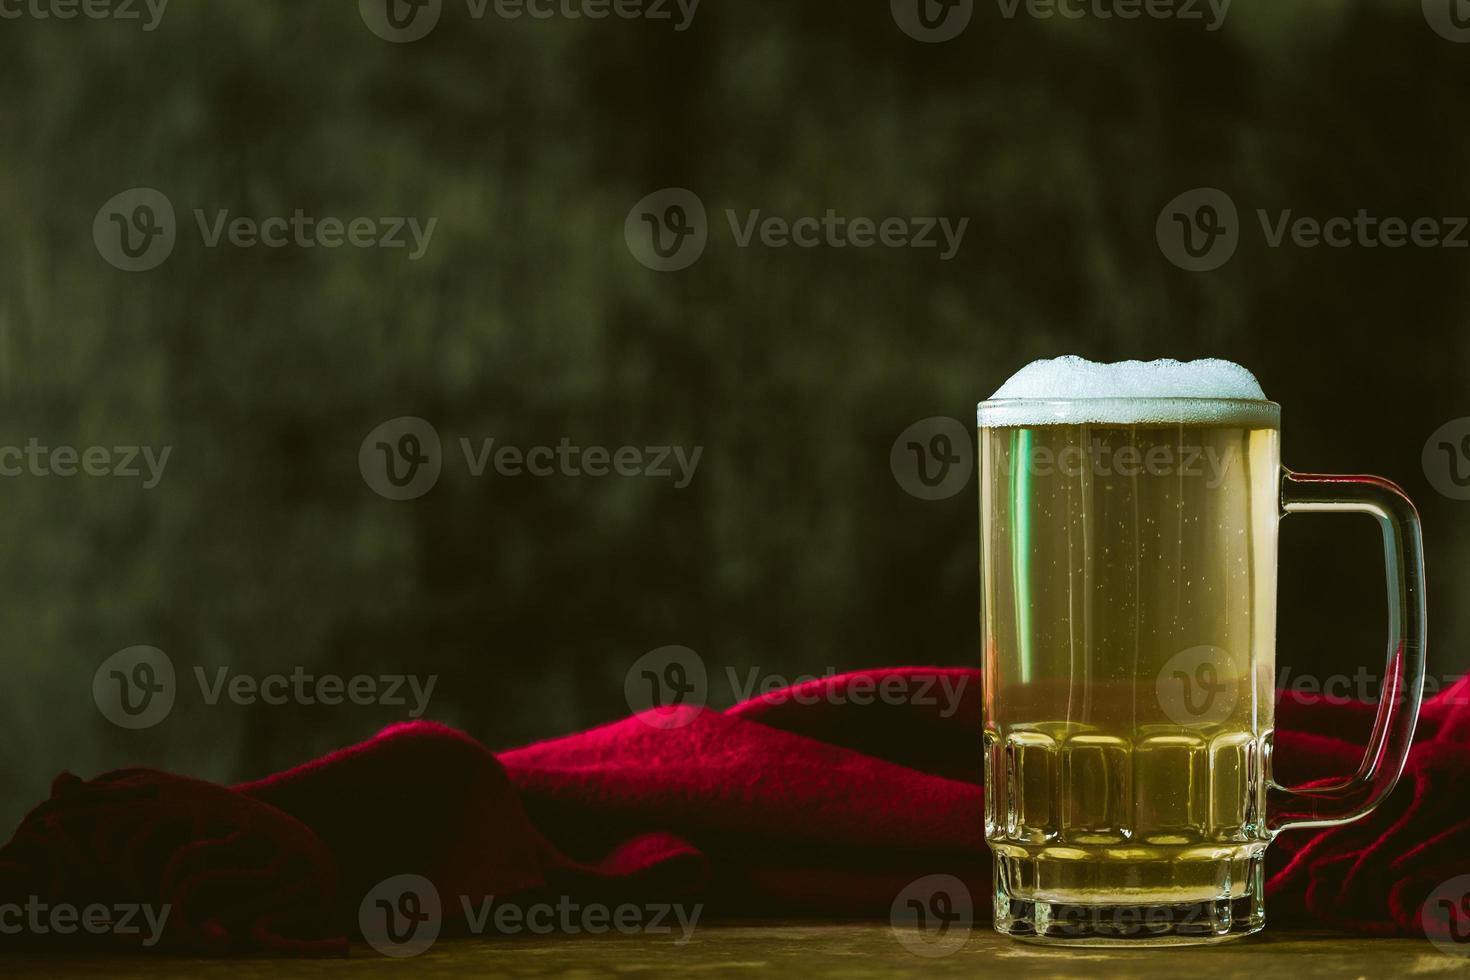 Mug of beer with red scarf on the wooden table. Free space for text photo